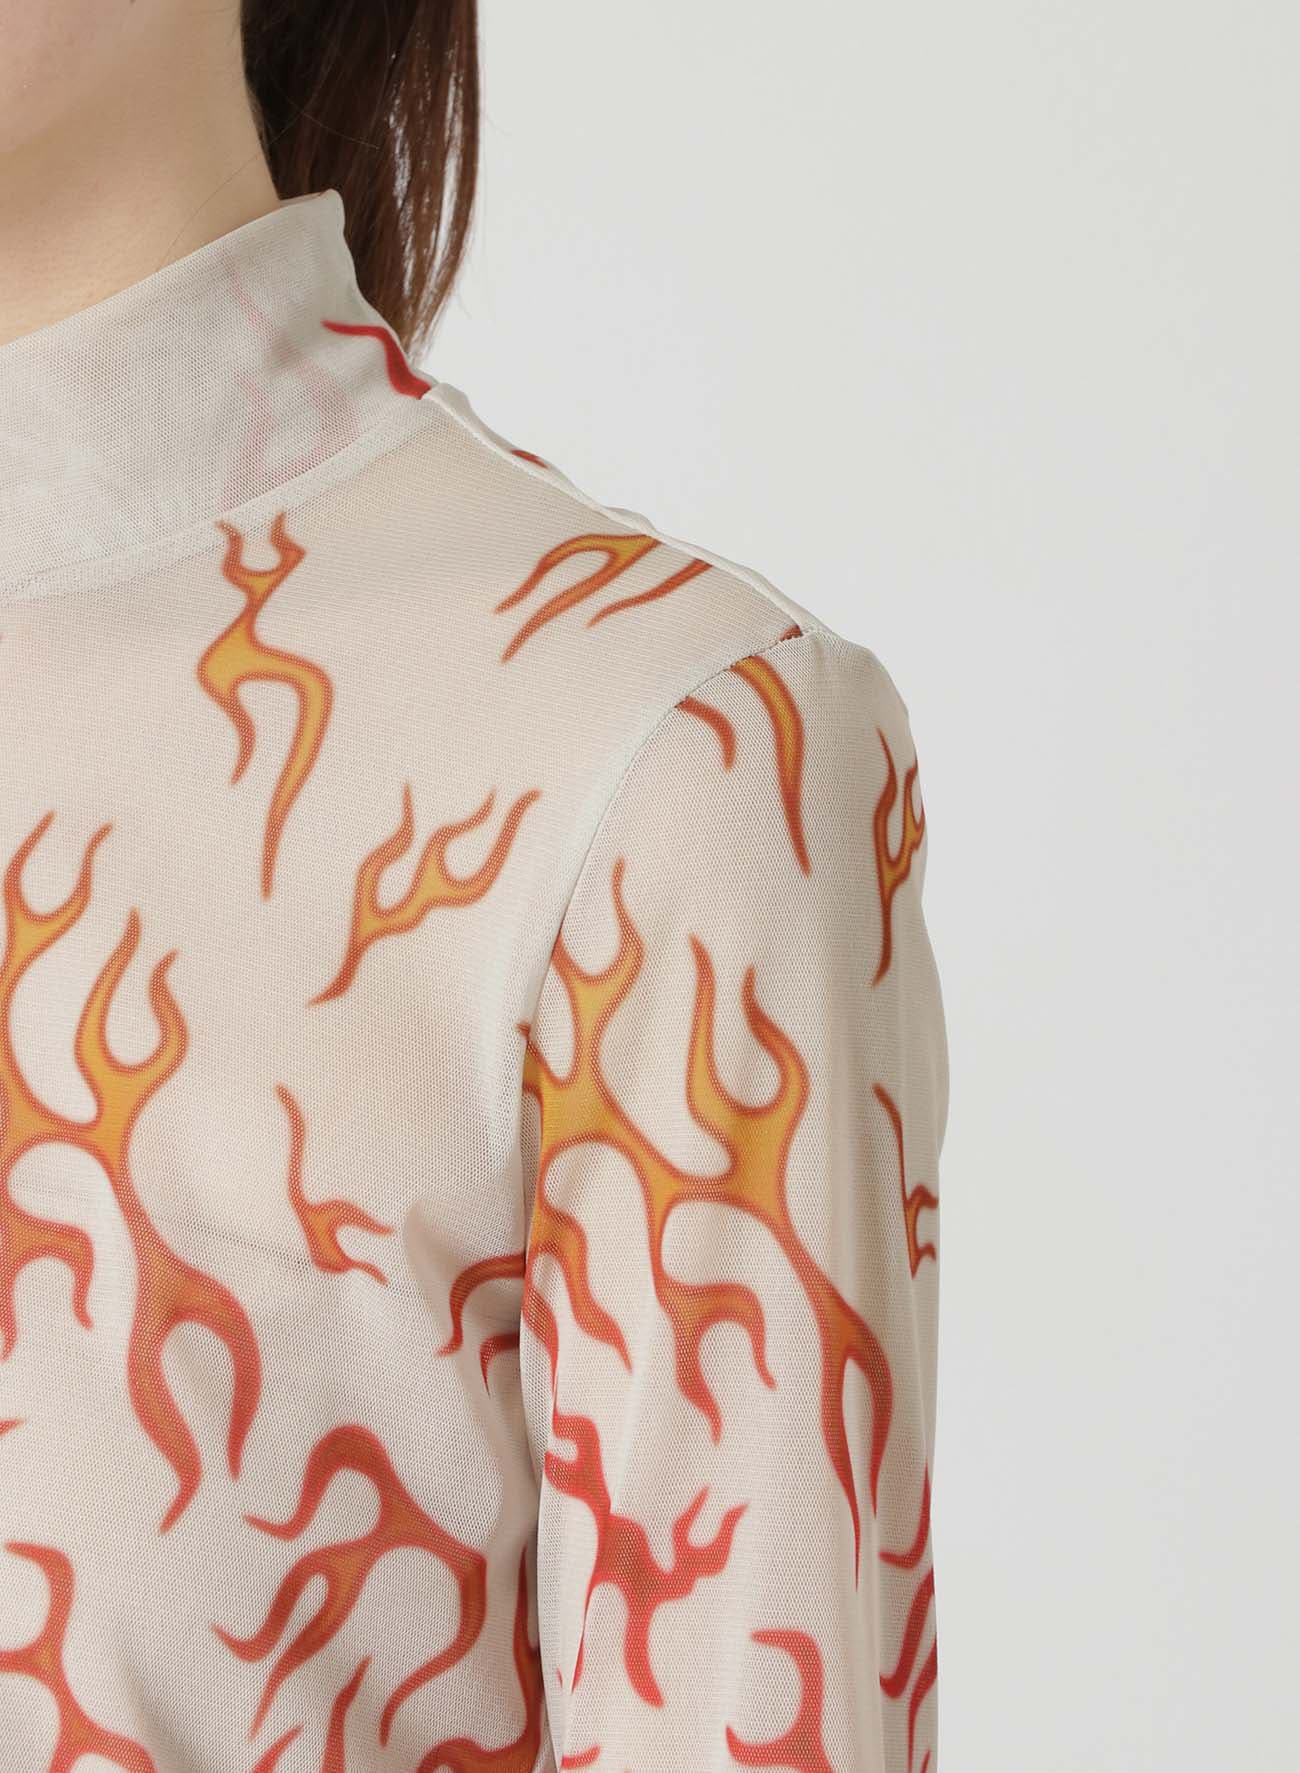 FIRE PRINT TOP WITH MOCK TURTLENECK